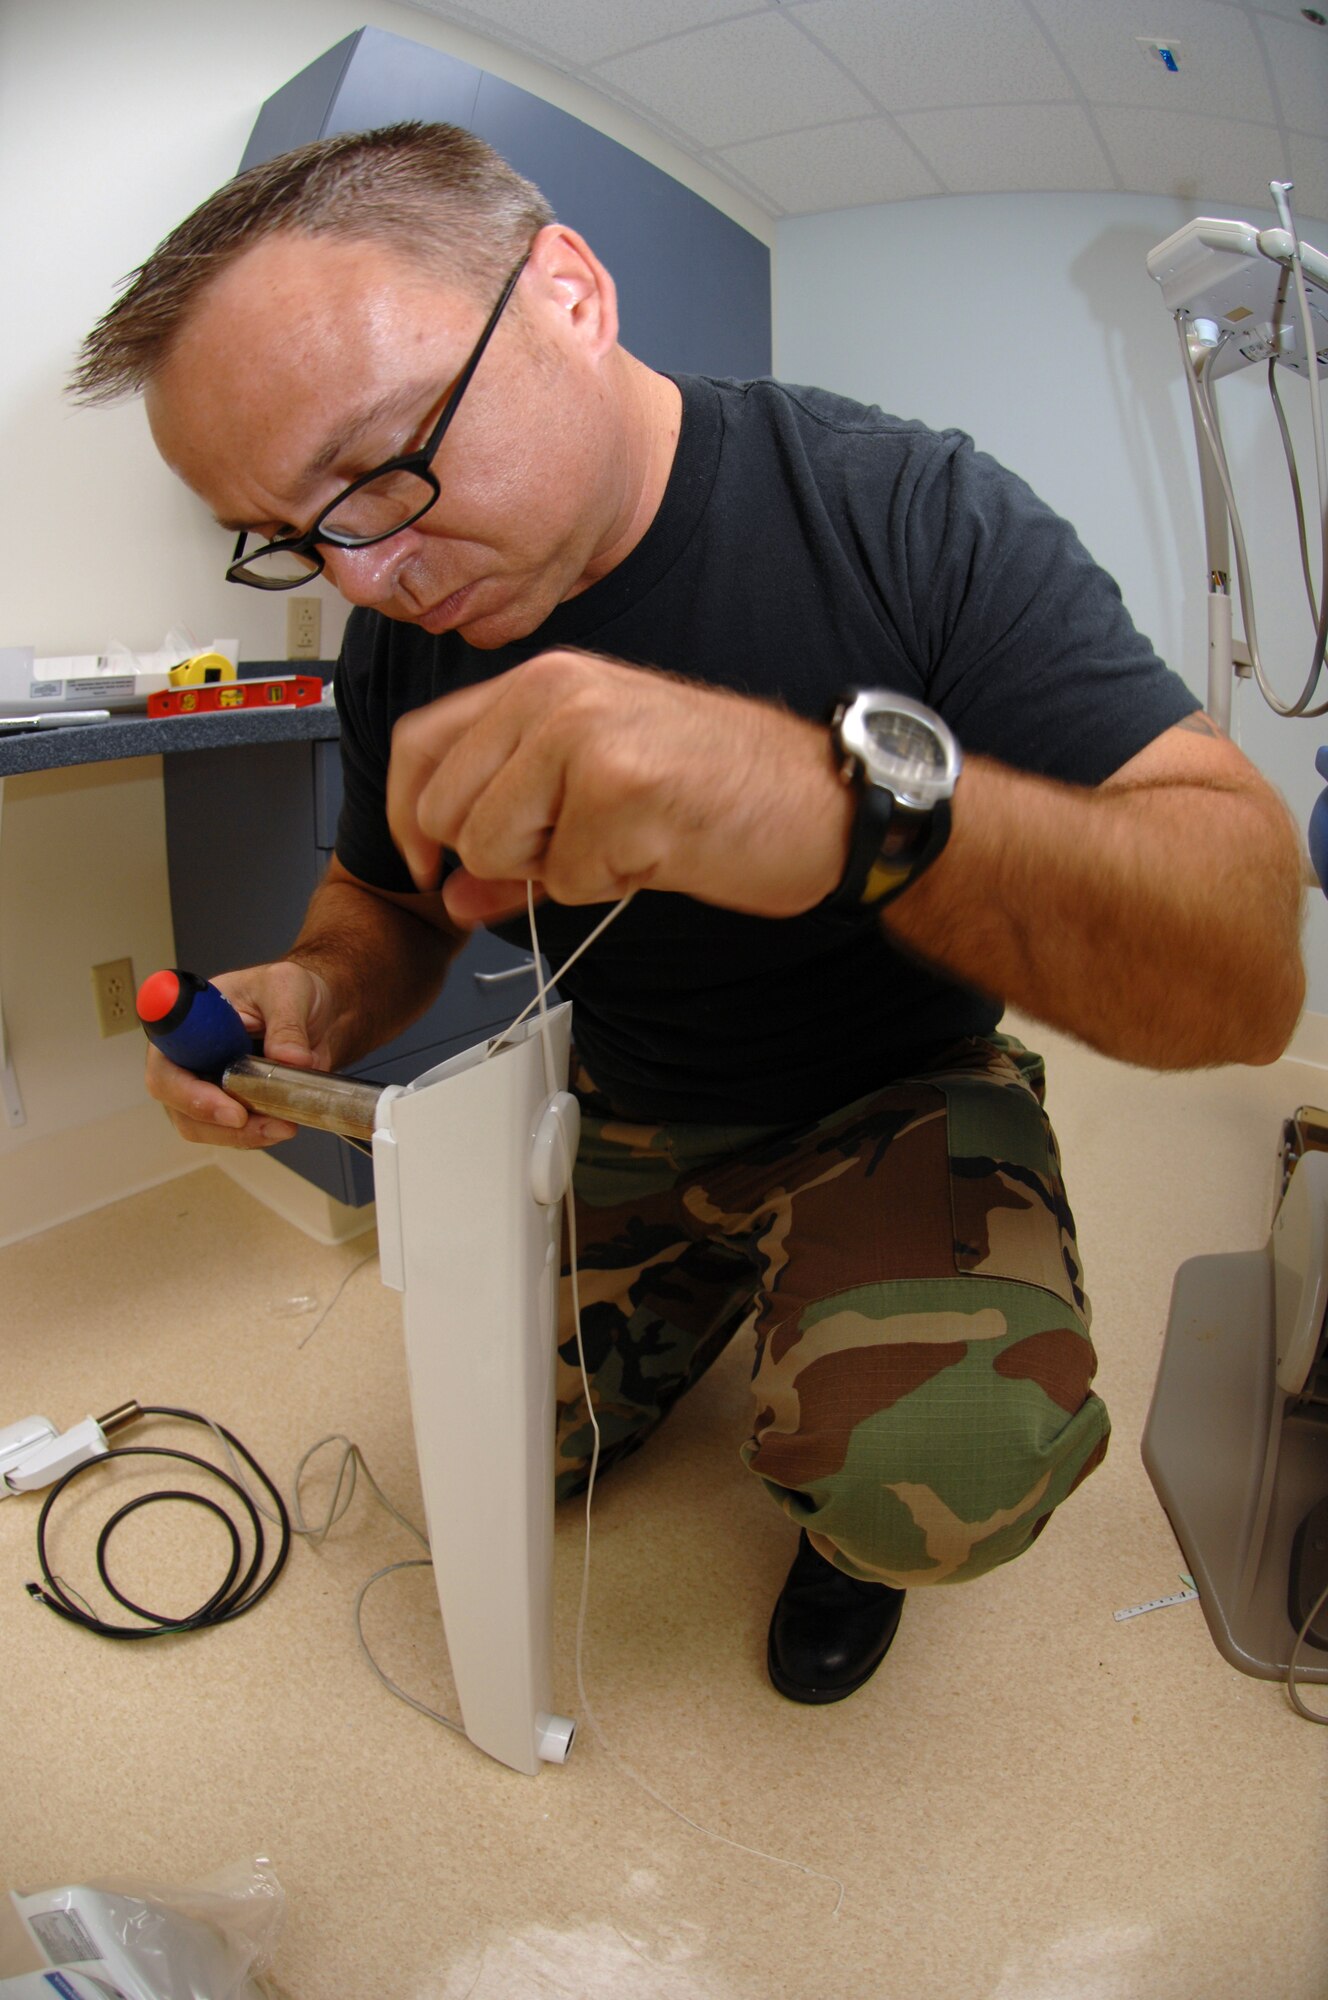 SEYMOUR JOHNSON AIR FORCE BASE, N.C. - Tech. Sgt. Christian Ziermann, 4th Medical Support Squadron, bio medical equipment repair technician, runs wire through the arm of the inner-oral x-ray unit September 6. The new equipment being installed is part of a $3.7 million renovation project. (U.S. Air Force photo by Airman First Class Salma Din)